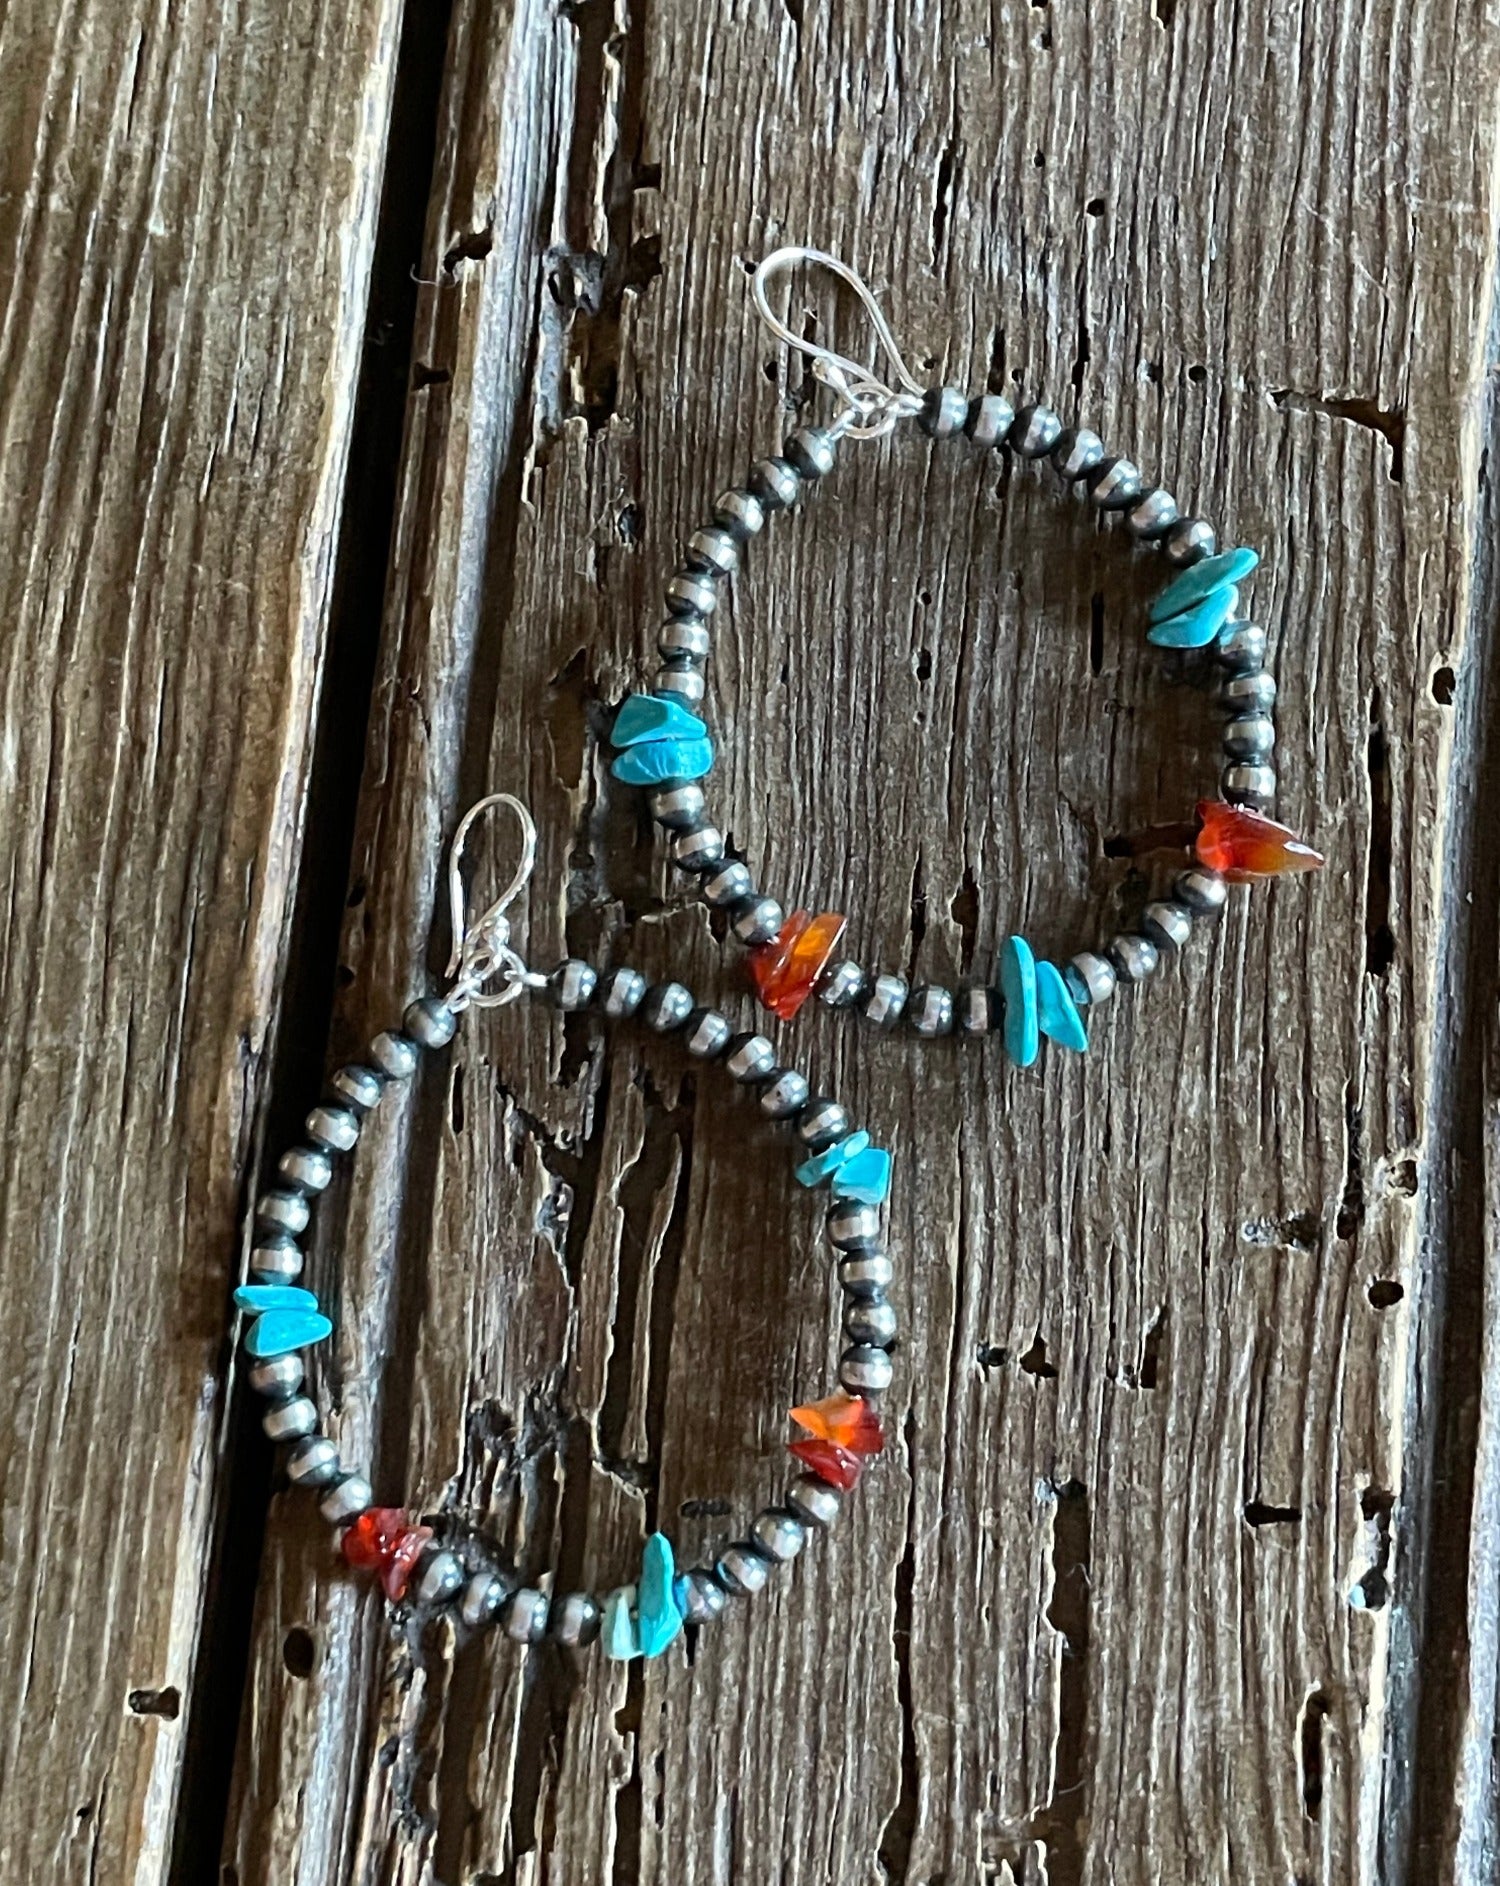 Navaho Pearl hoop earrings with Amber and Turquoise chips